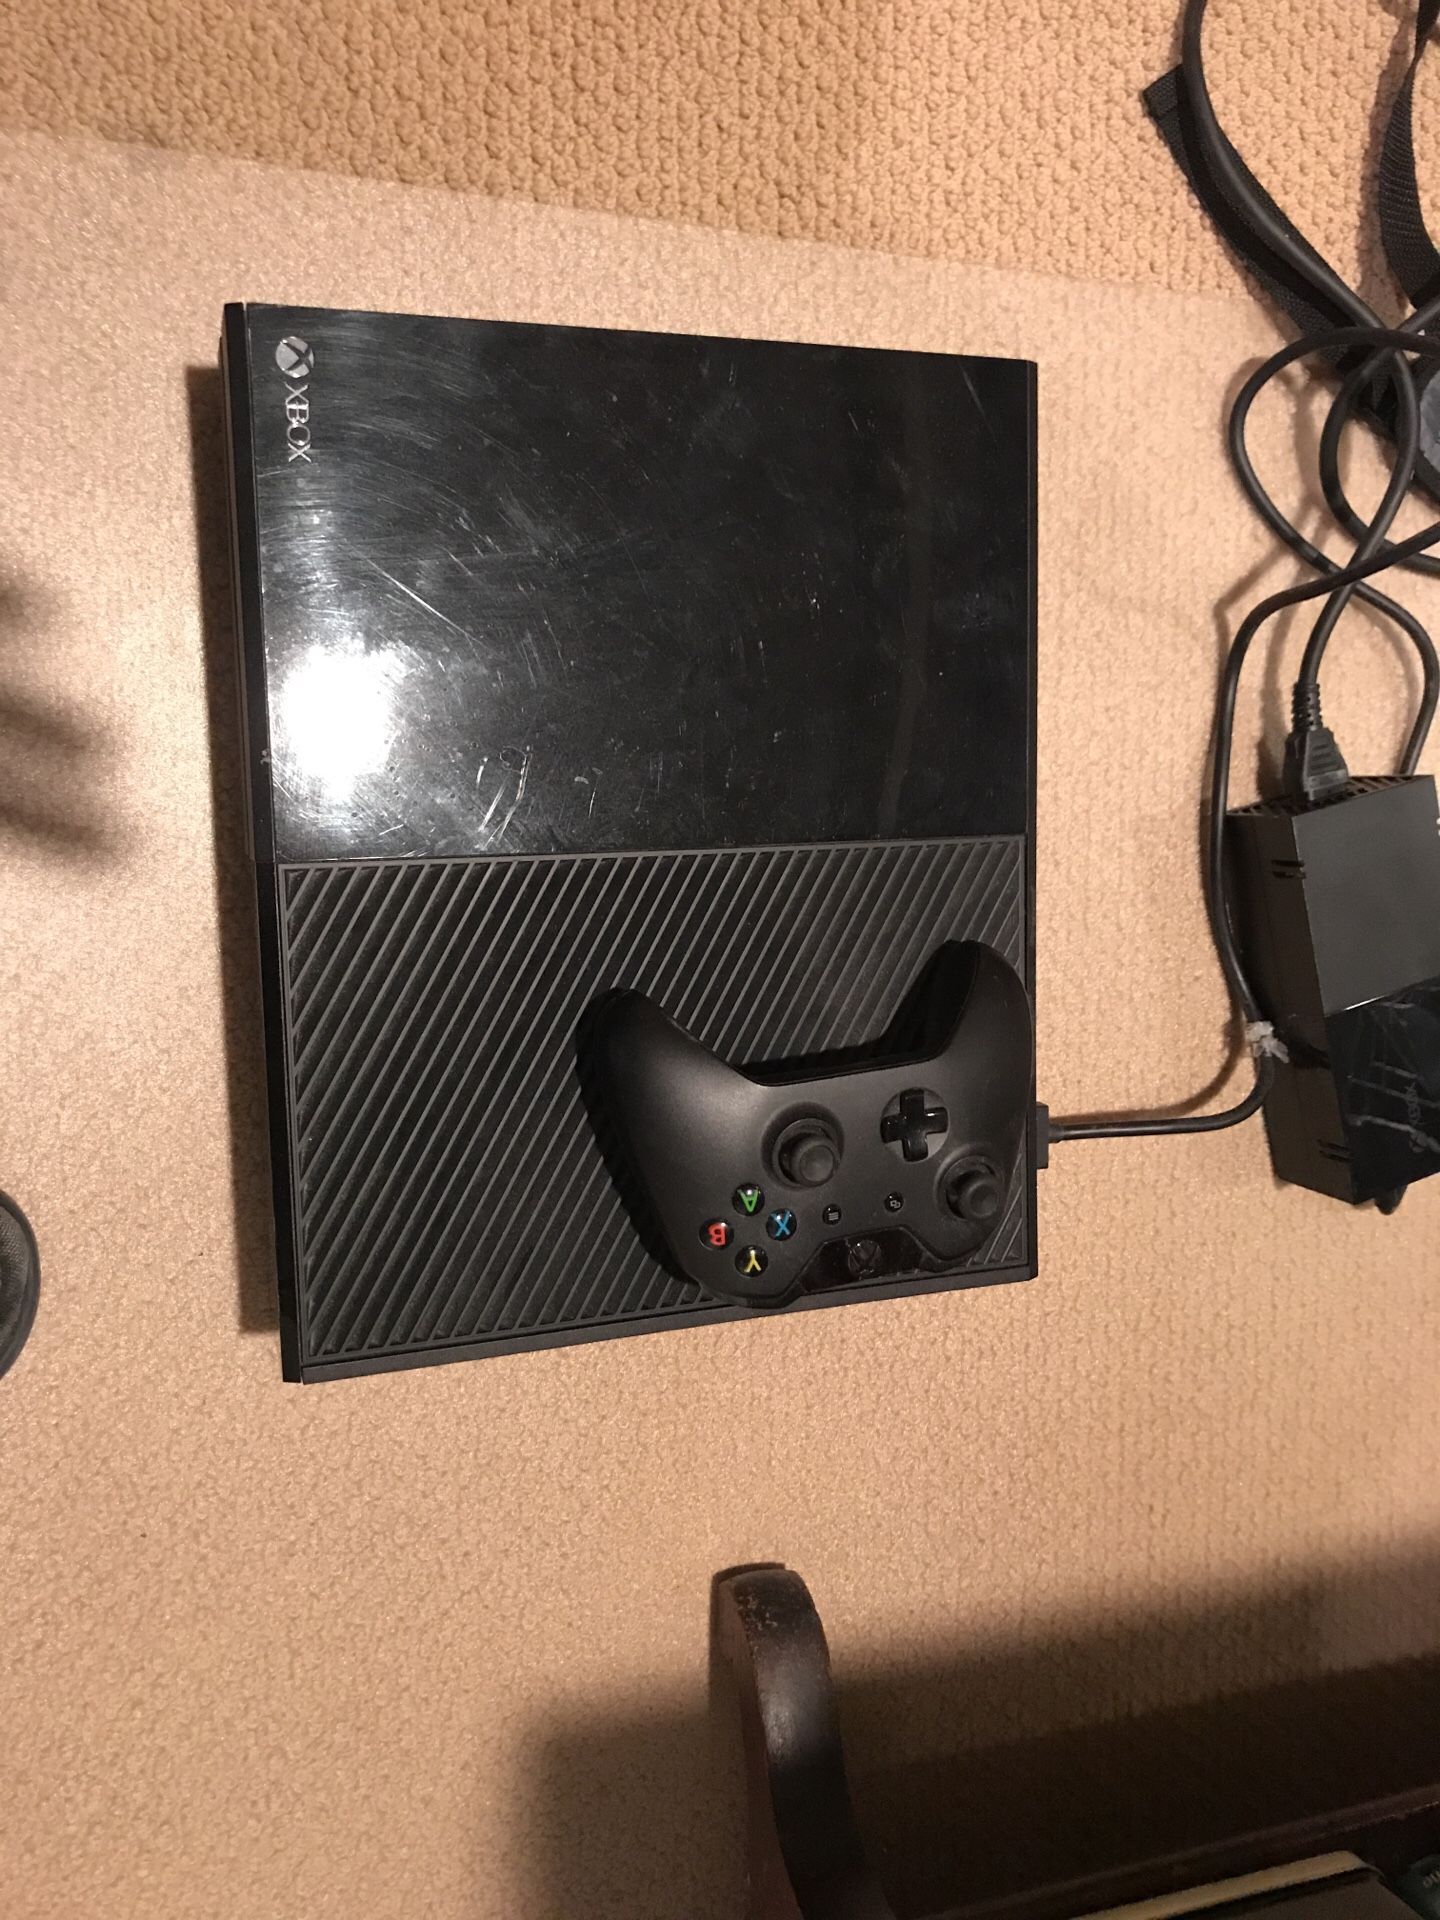 Xbox one, one controller and power cord, brick